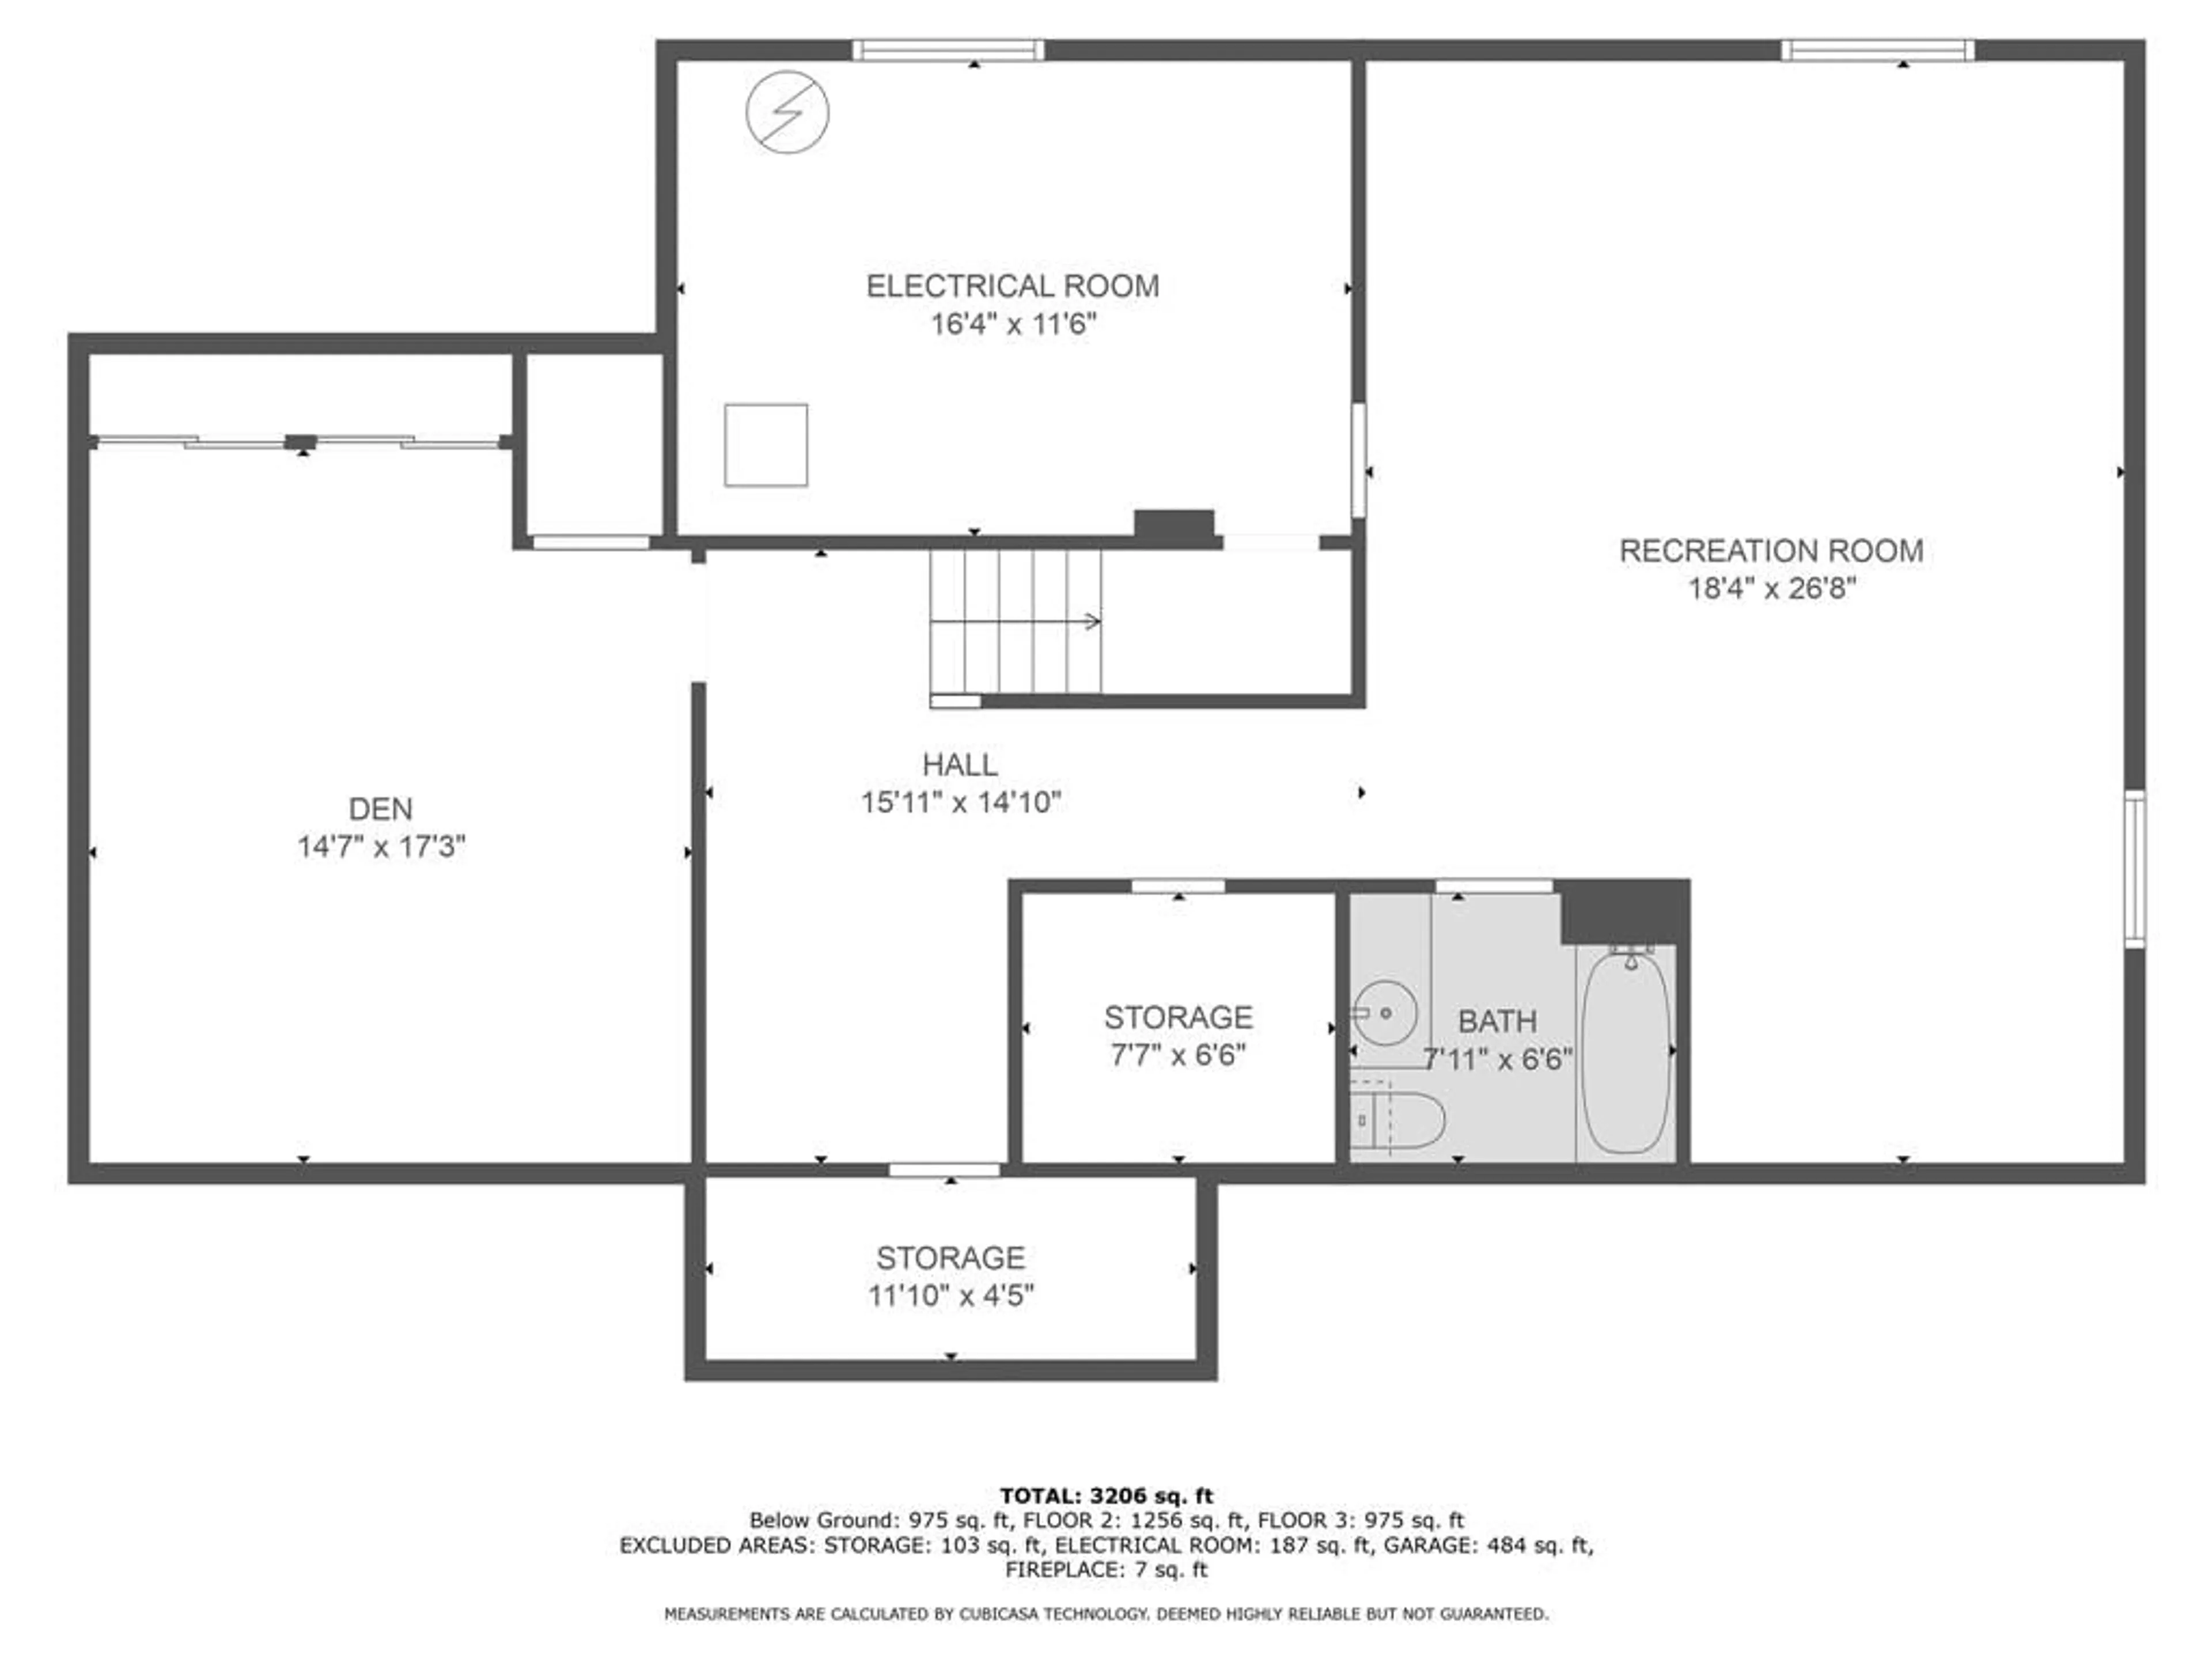 Floor plan for 1317 STORMONT Dr, Cornwall Ontario K6H 6Y3